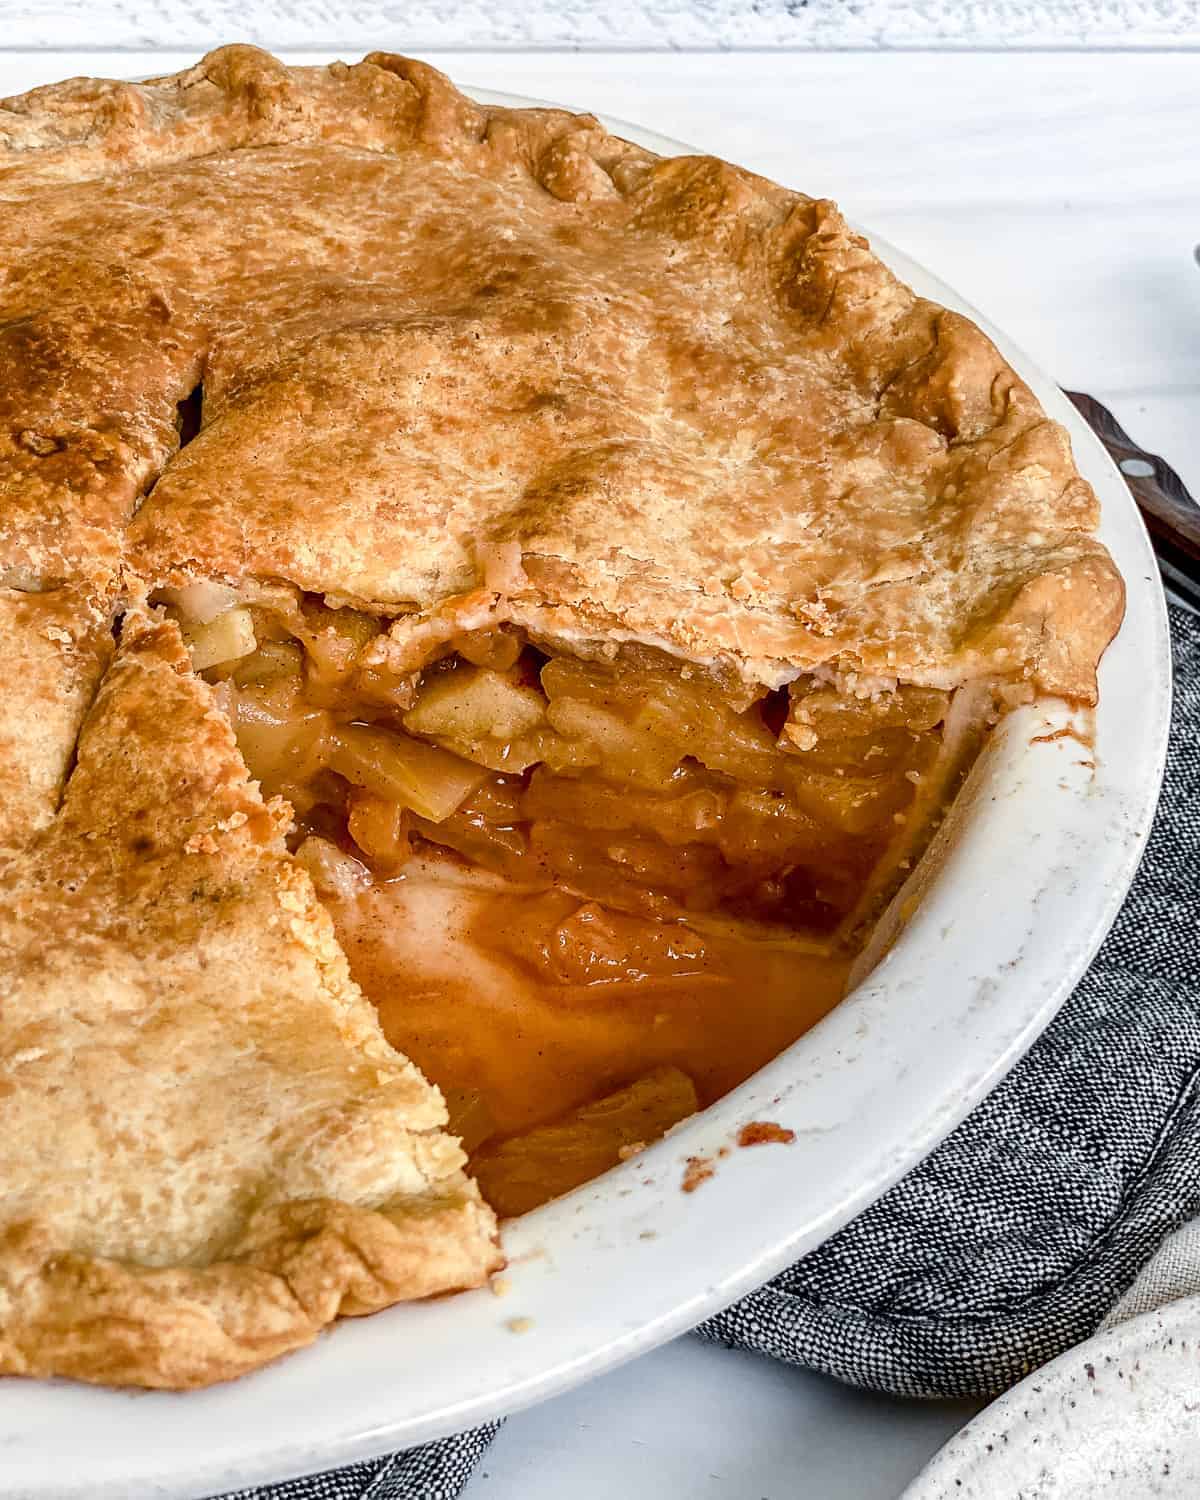 completed Vegan Apple Pie with a piece missing in a pie dish